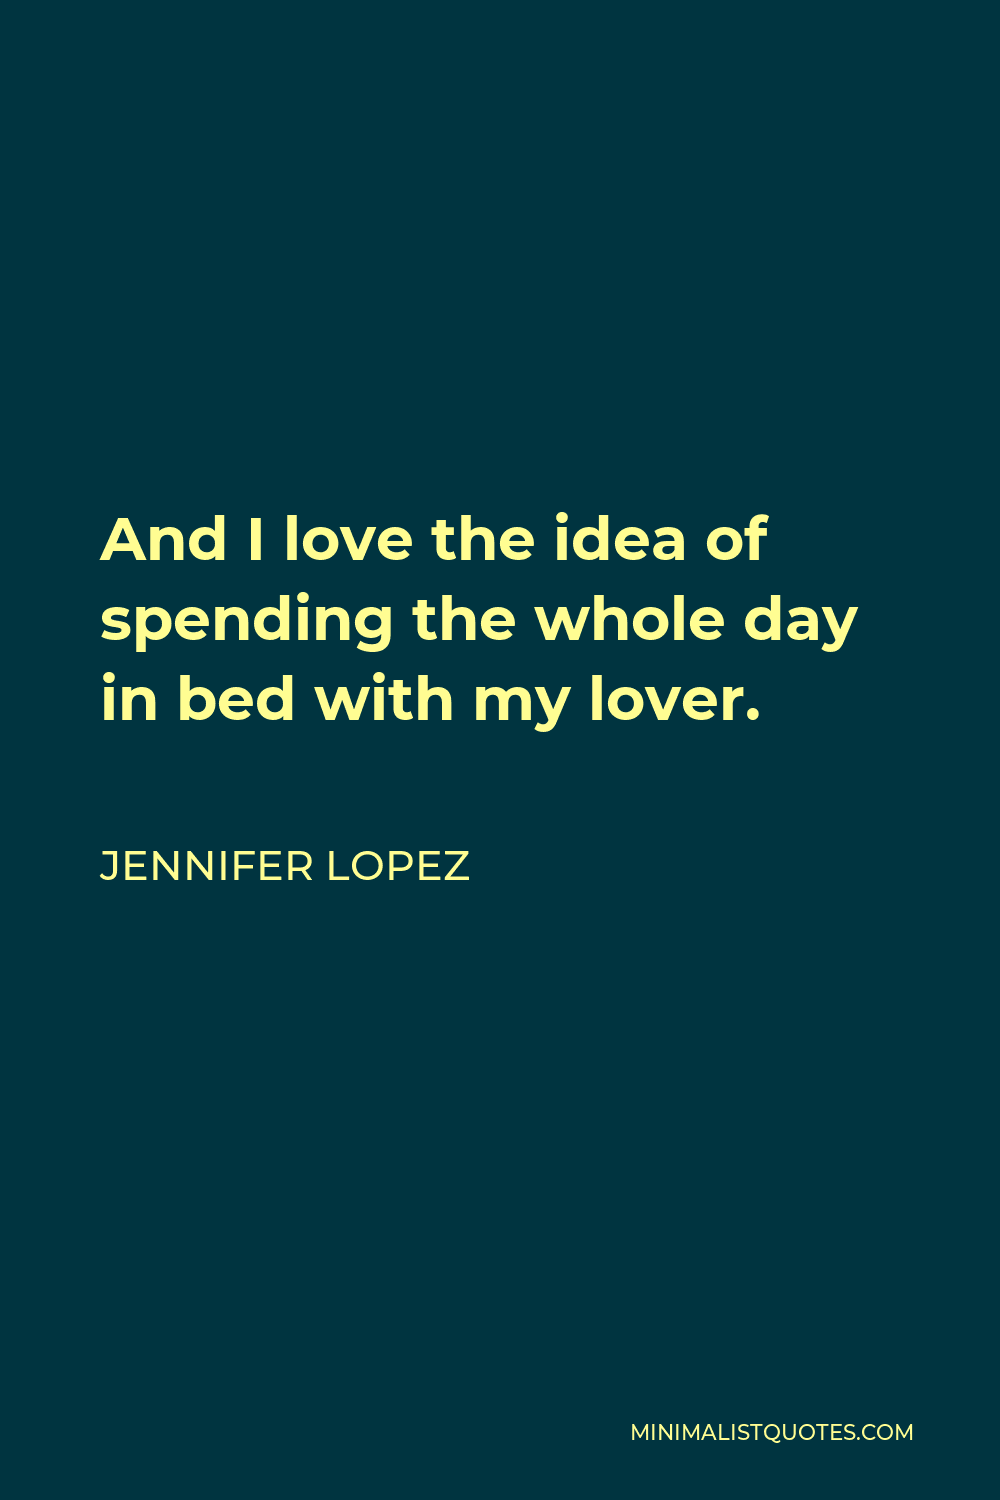 Jennifer Lopez Quote - And I love the idea of spending the whole day in bed with my lover.